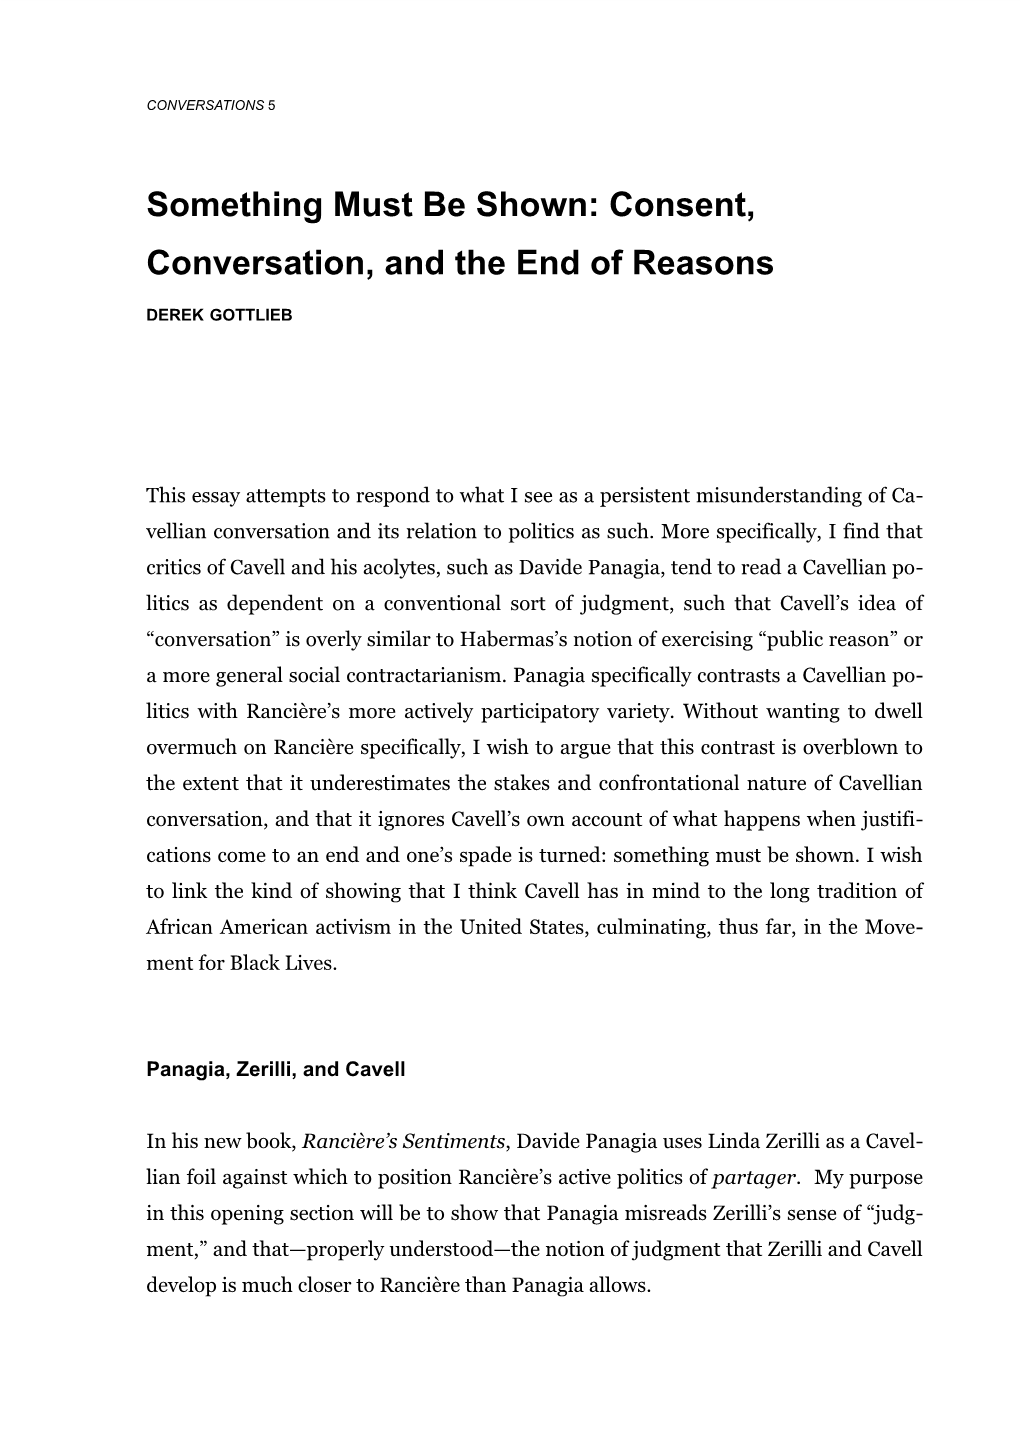 Consent, Conversation, and the End of Reasons